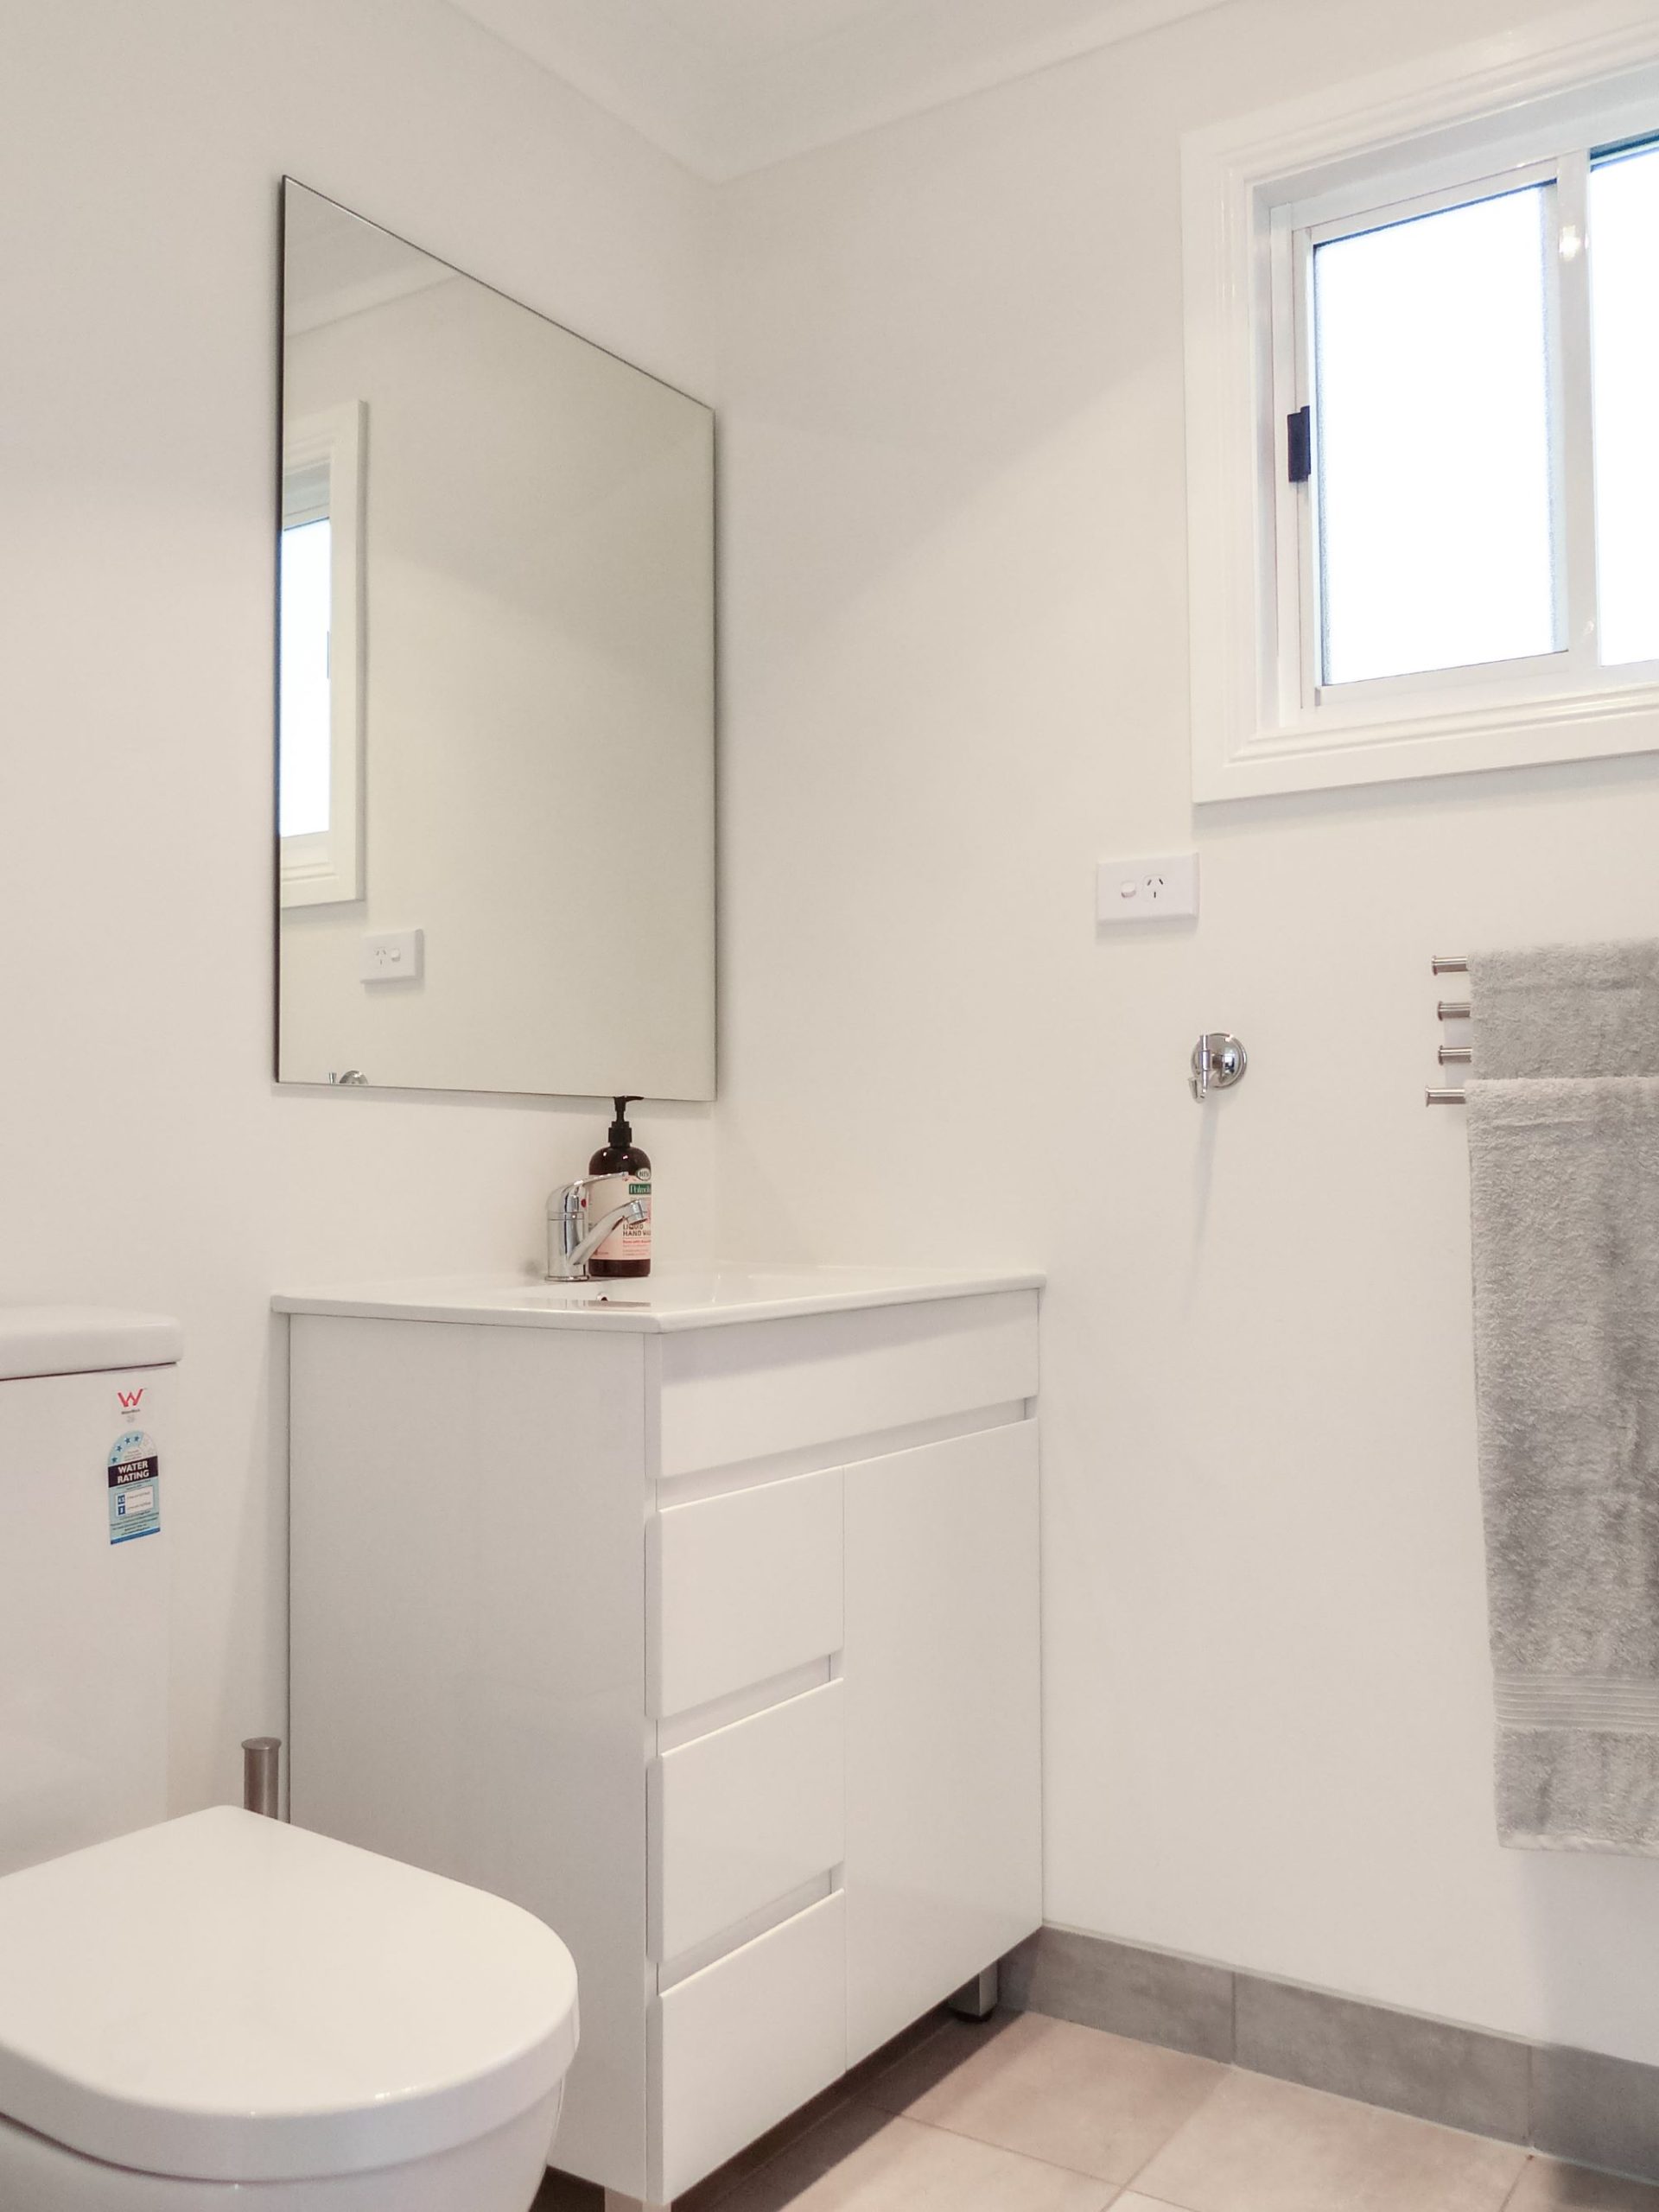 A clean, white bathroom in a cabin at an accommodation venue in Sydney.